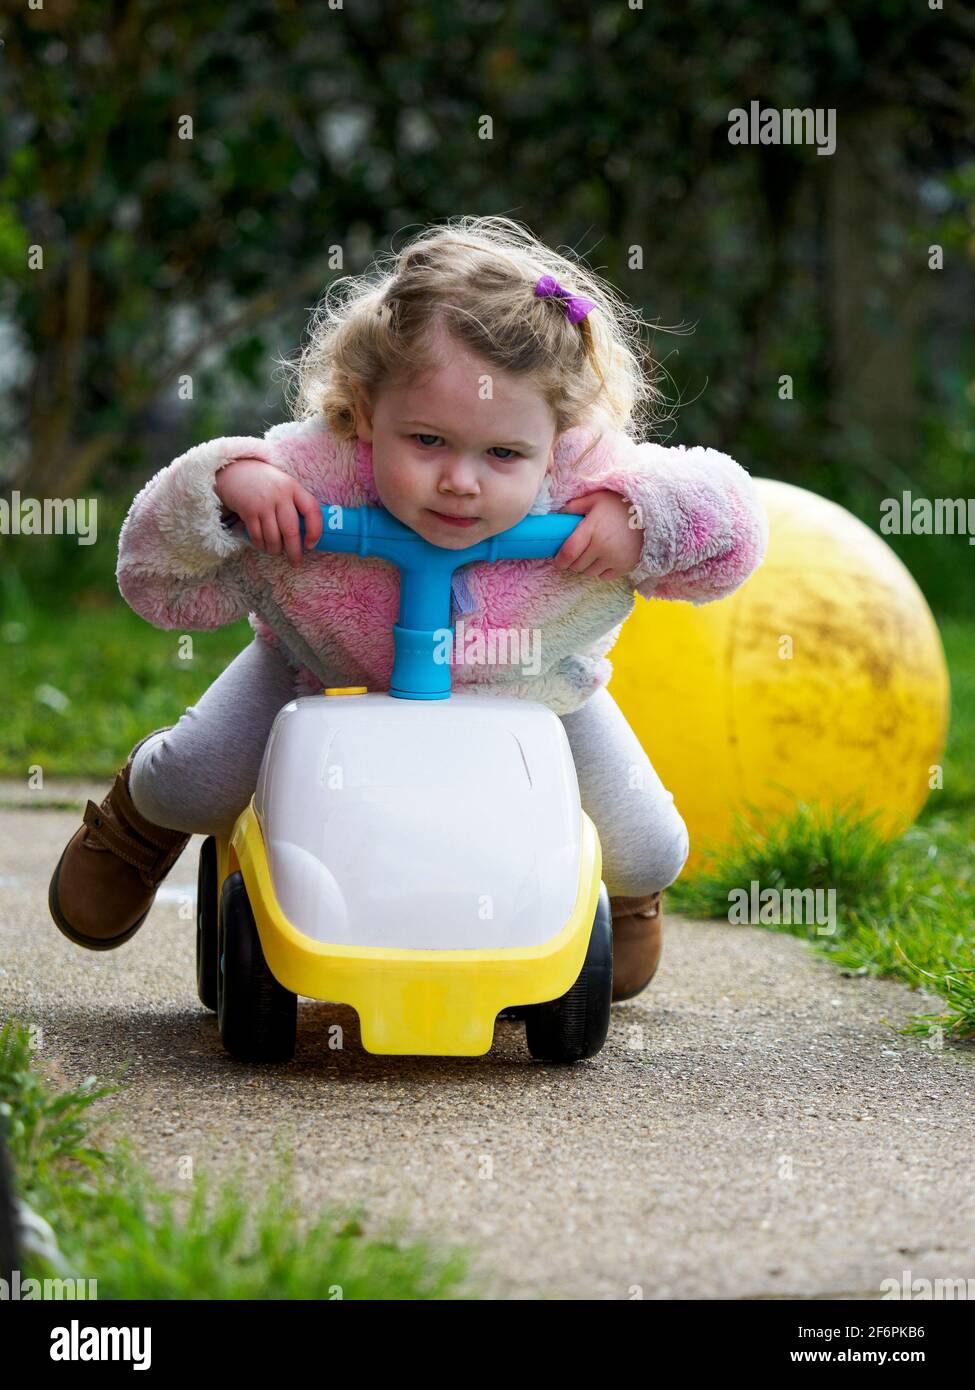 Toddler playing on a ride on toy car in the garden, UK Stock Photo